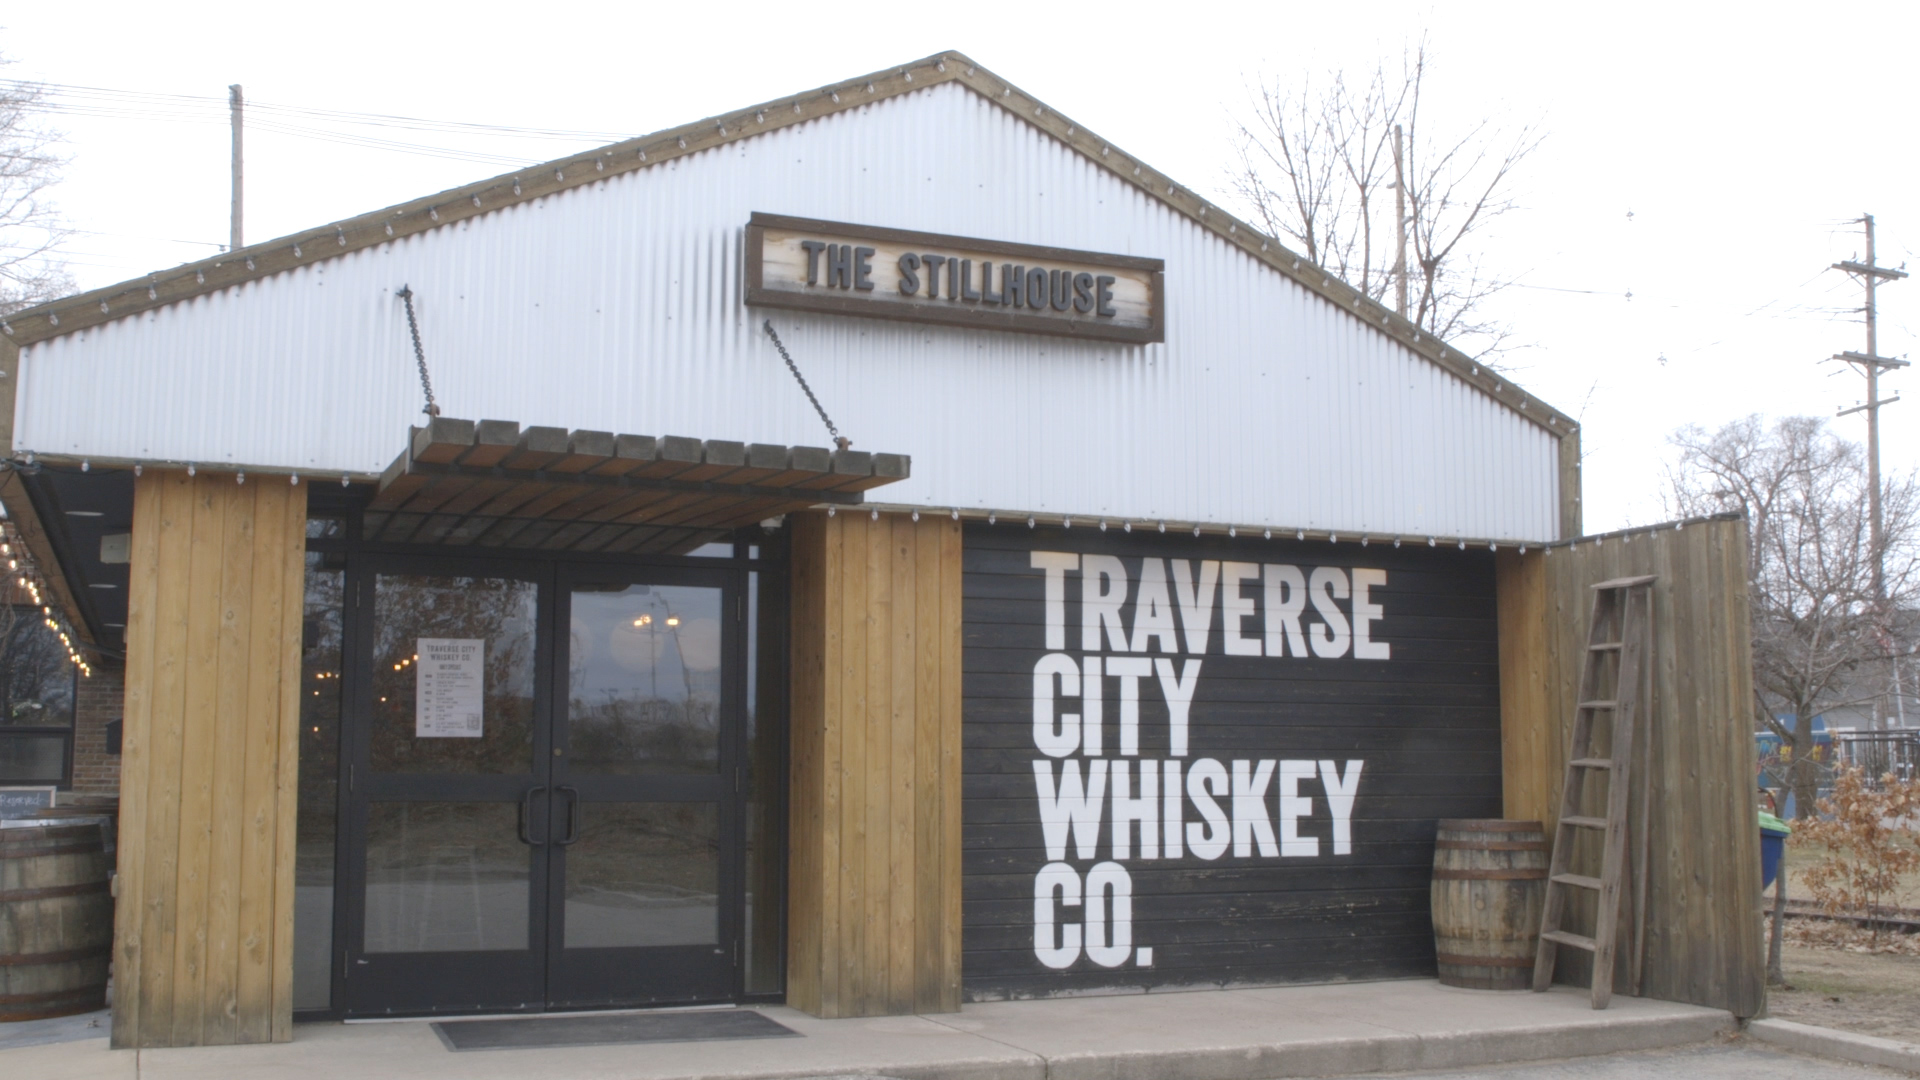 Come out to Traverse City Whiskey Co.’s Winter Warm Up on Saturday